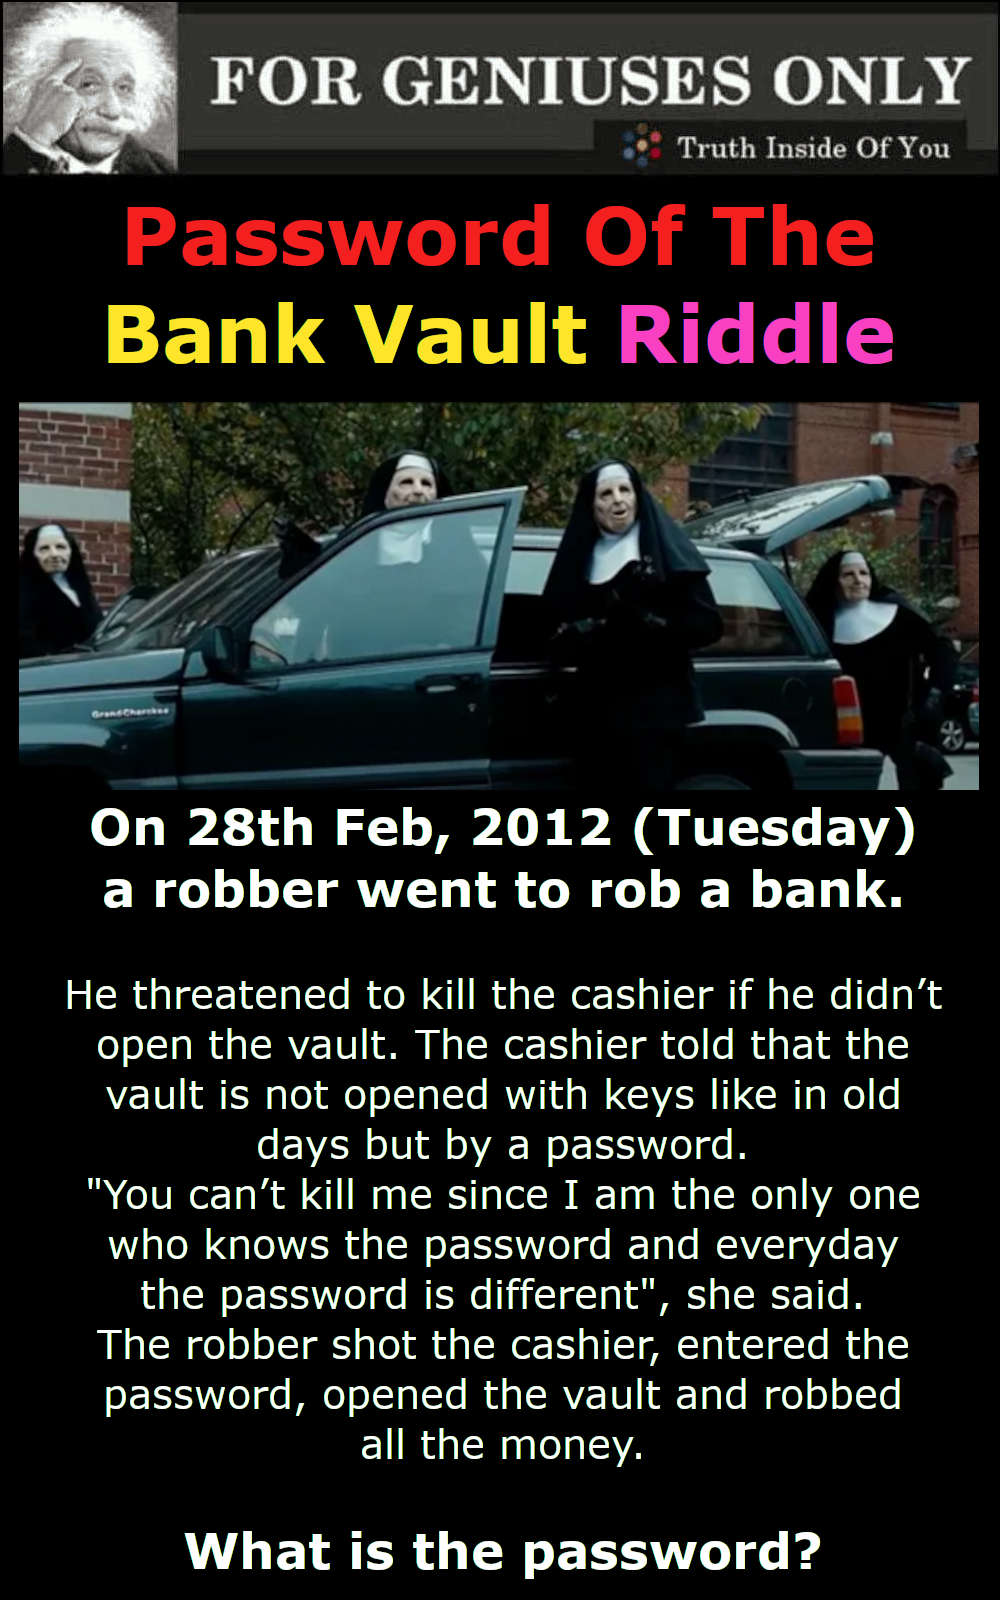 The Password Of The Bank Vault Riddle